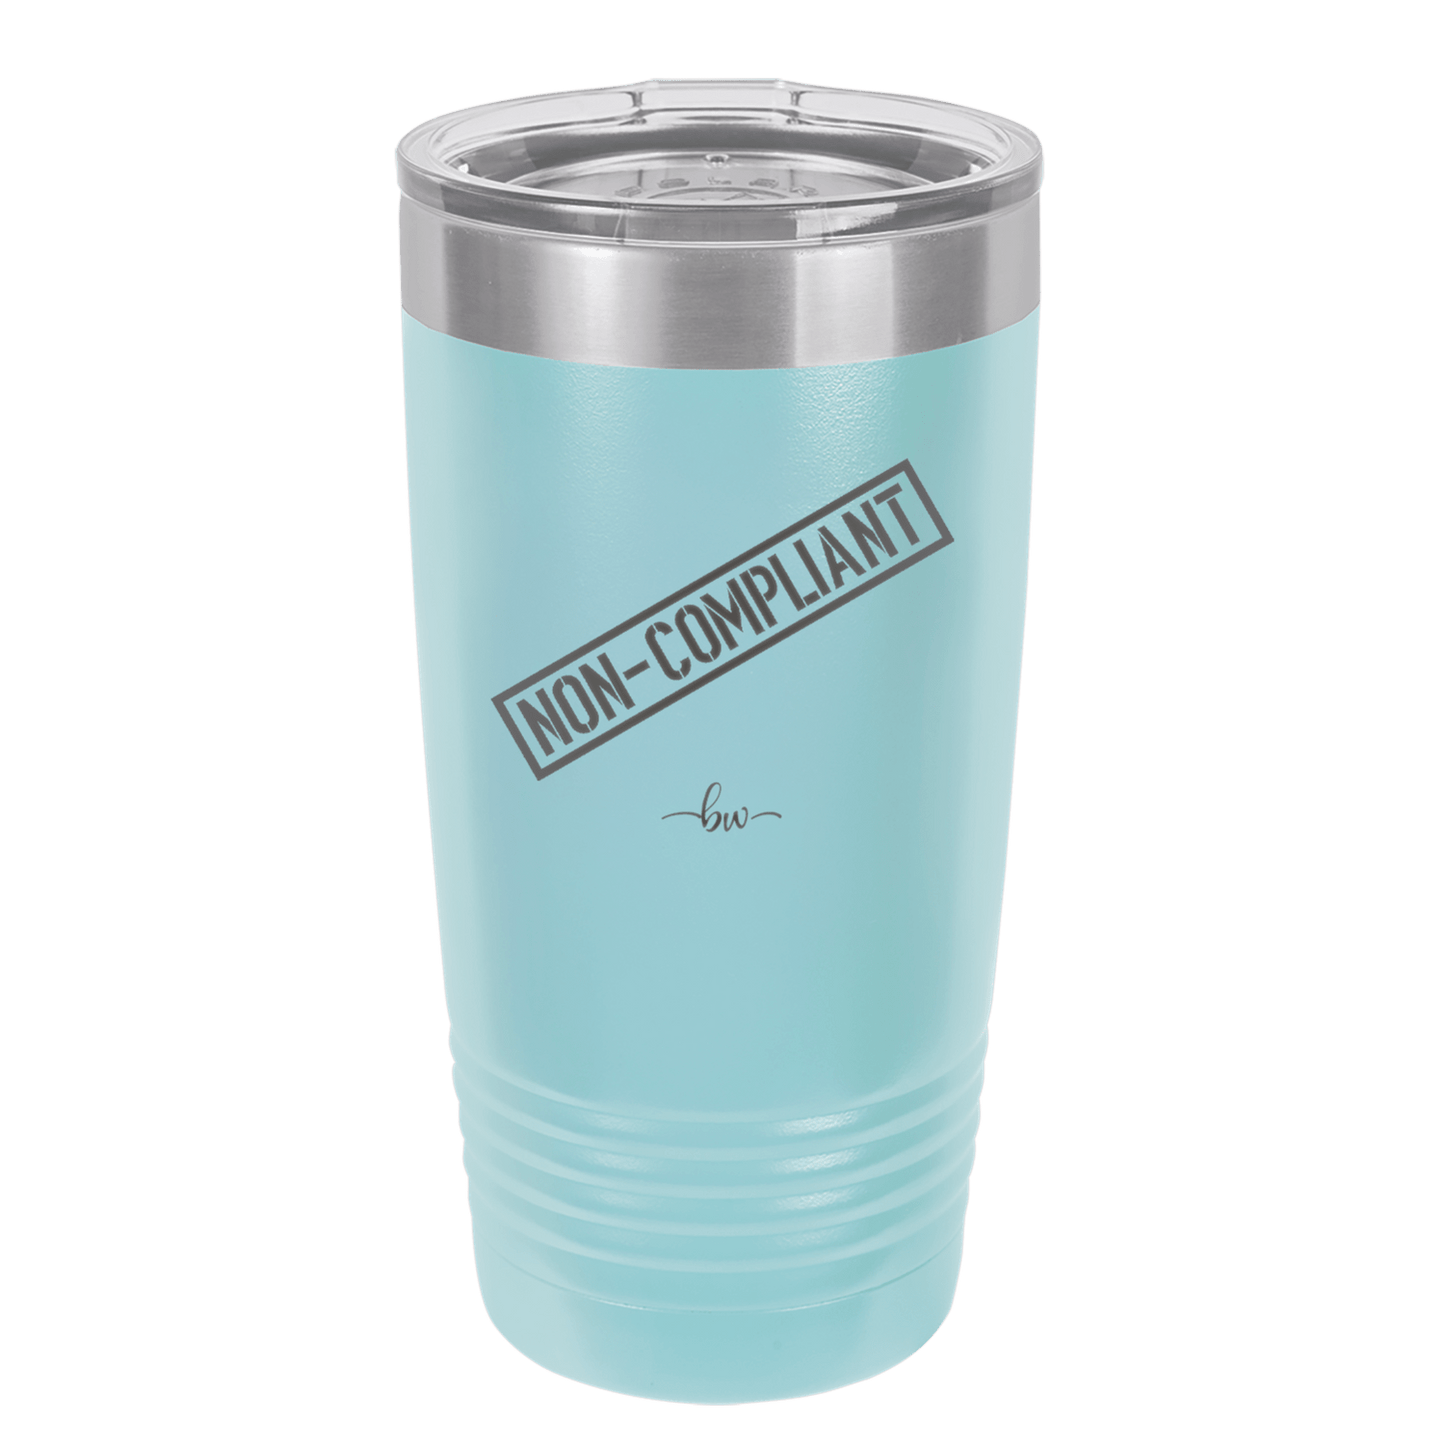 Non-Compliant 2 - Laser Engraved Stainless Steel Drinkware - 1691 -